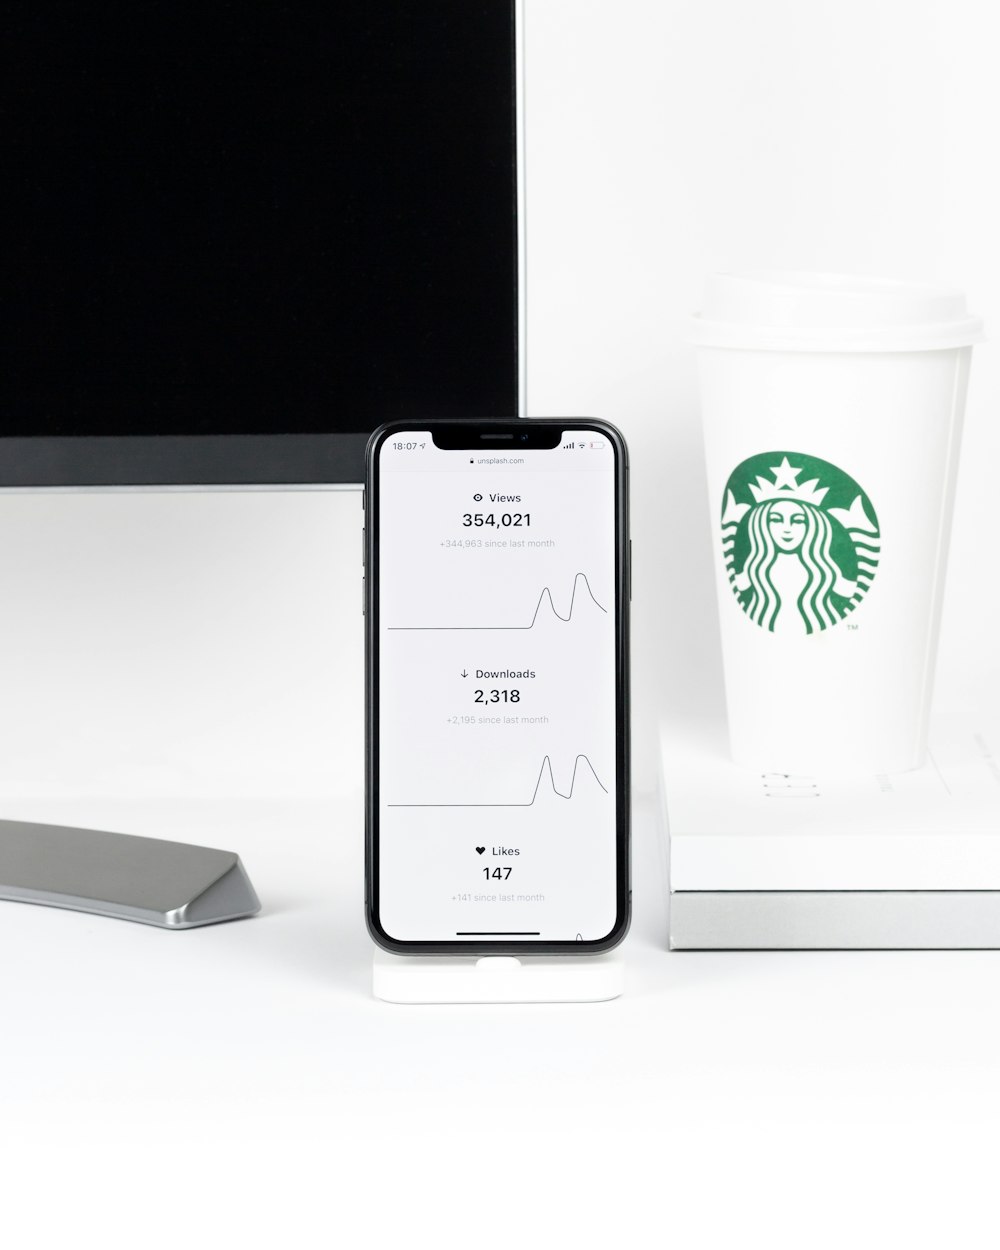 iPhone X beside Starbucks disposable cup on desk